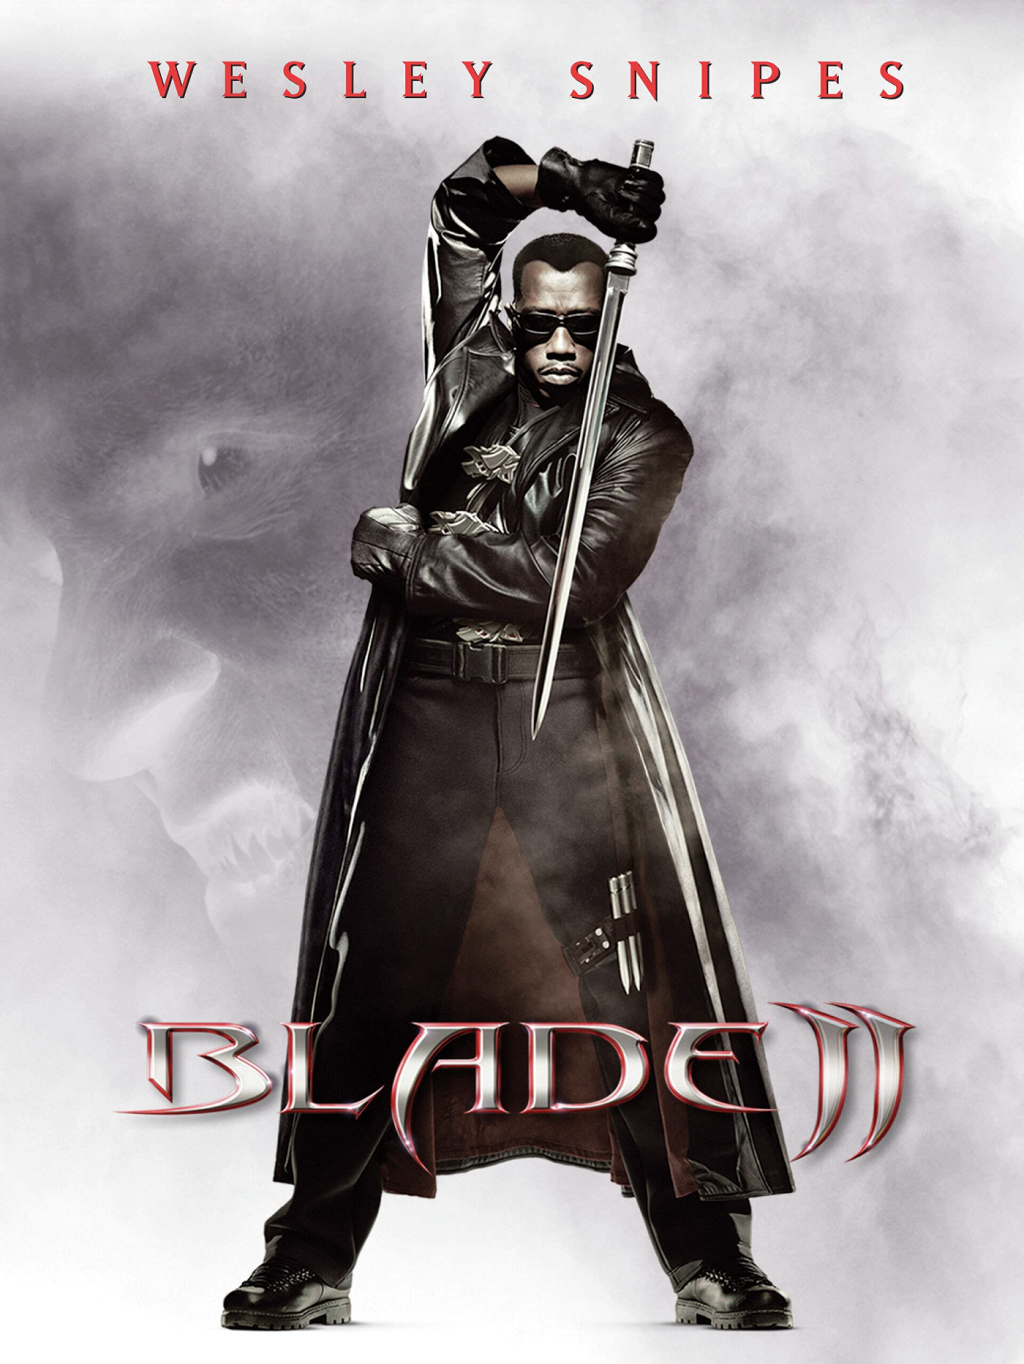 Blade II (2004) - Joanne Sheppard joins Tim Worthington for a chat about Eric Brooks finding that those raving vampires are still keeping him up all night in It’s Good, Except It Sucks.